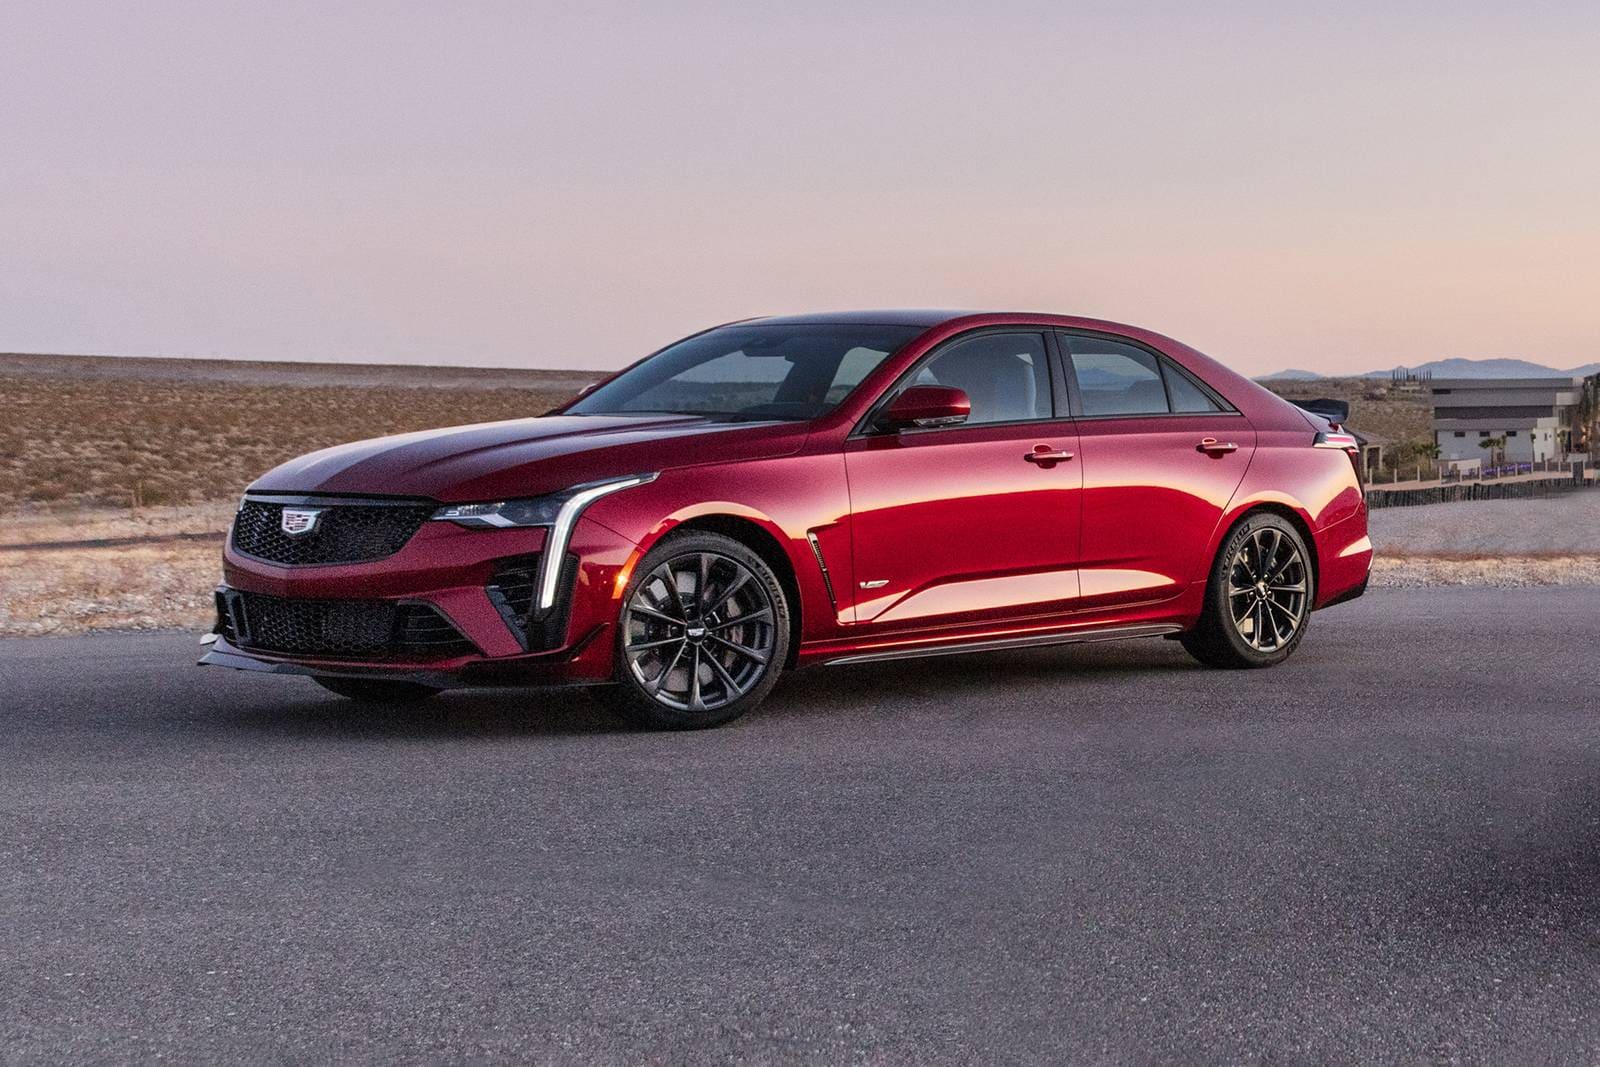 2022 Cadillac CT4-V Blackwing Prices, Reviews, and Pictures | Edmunds